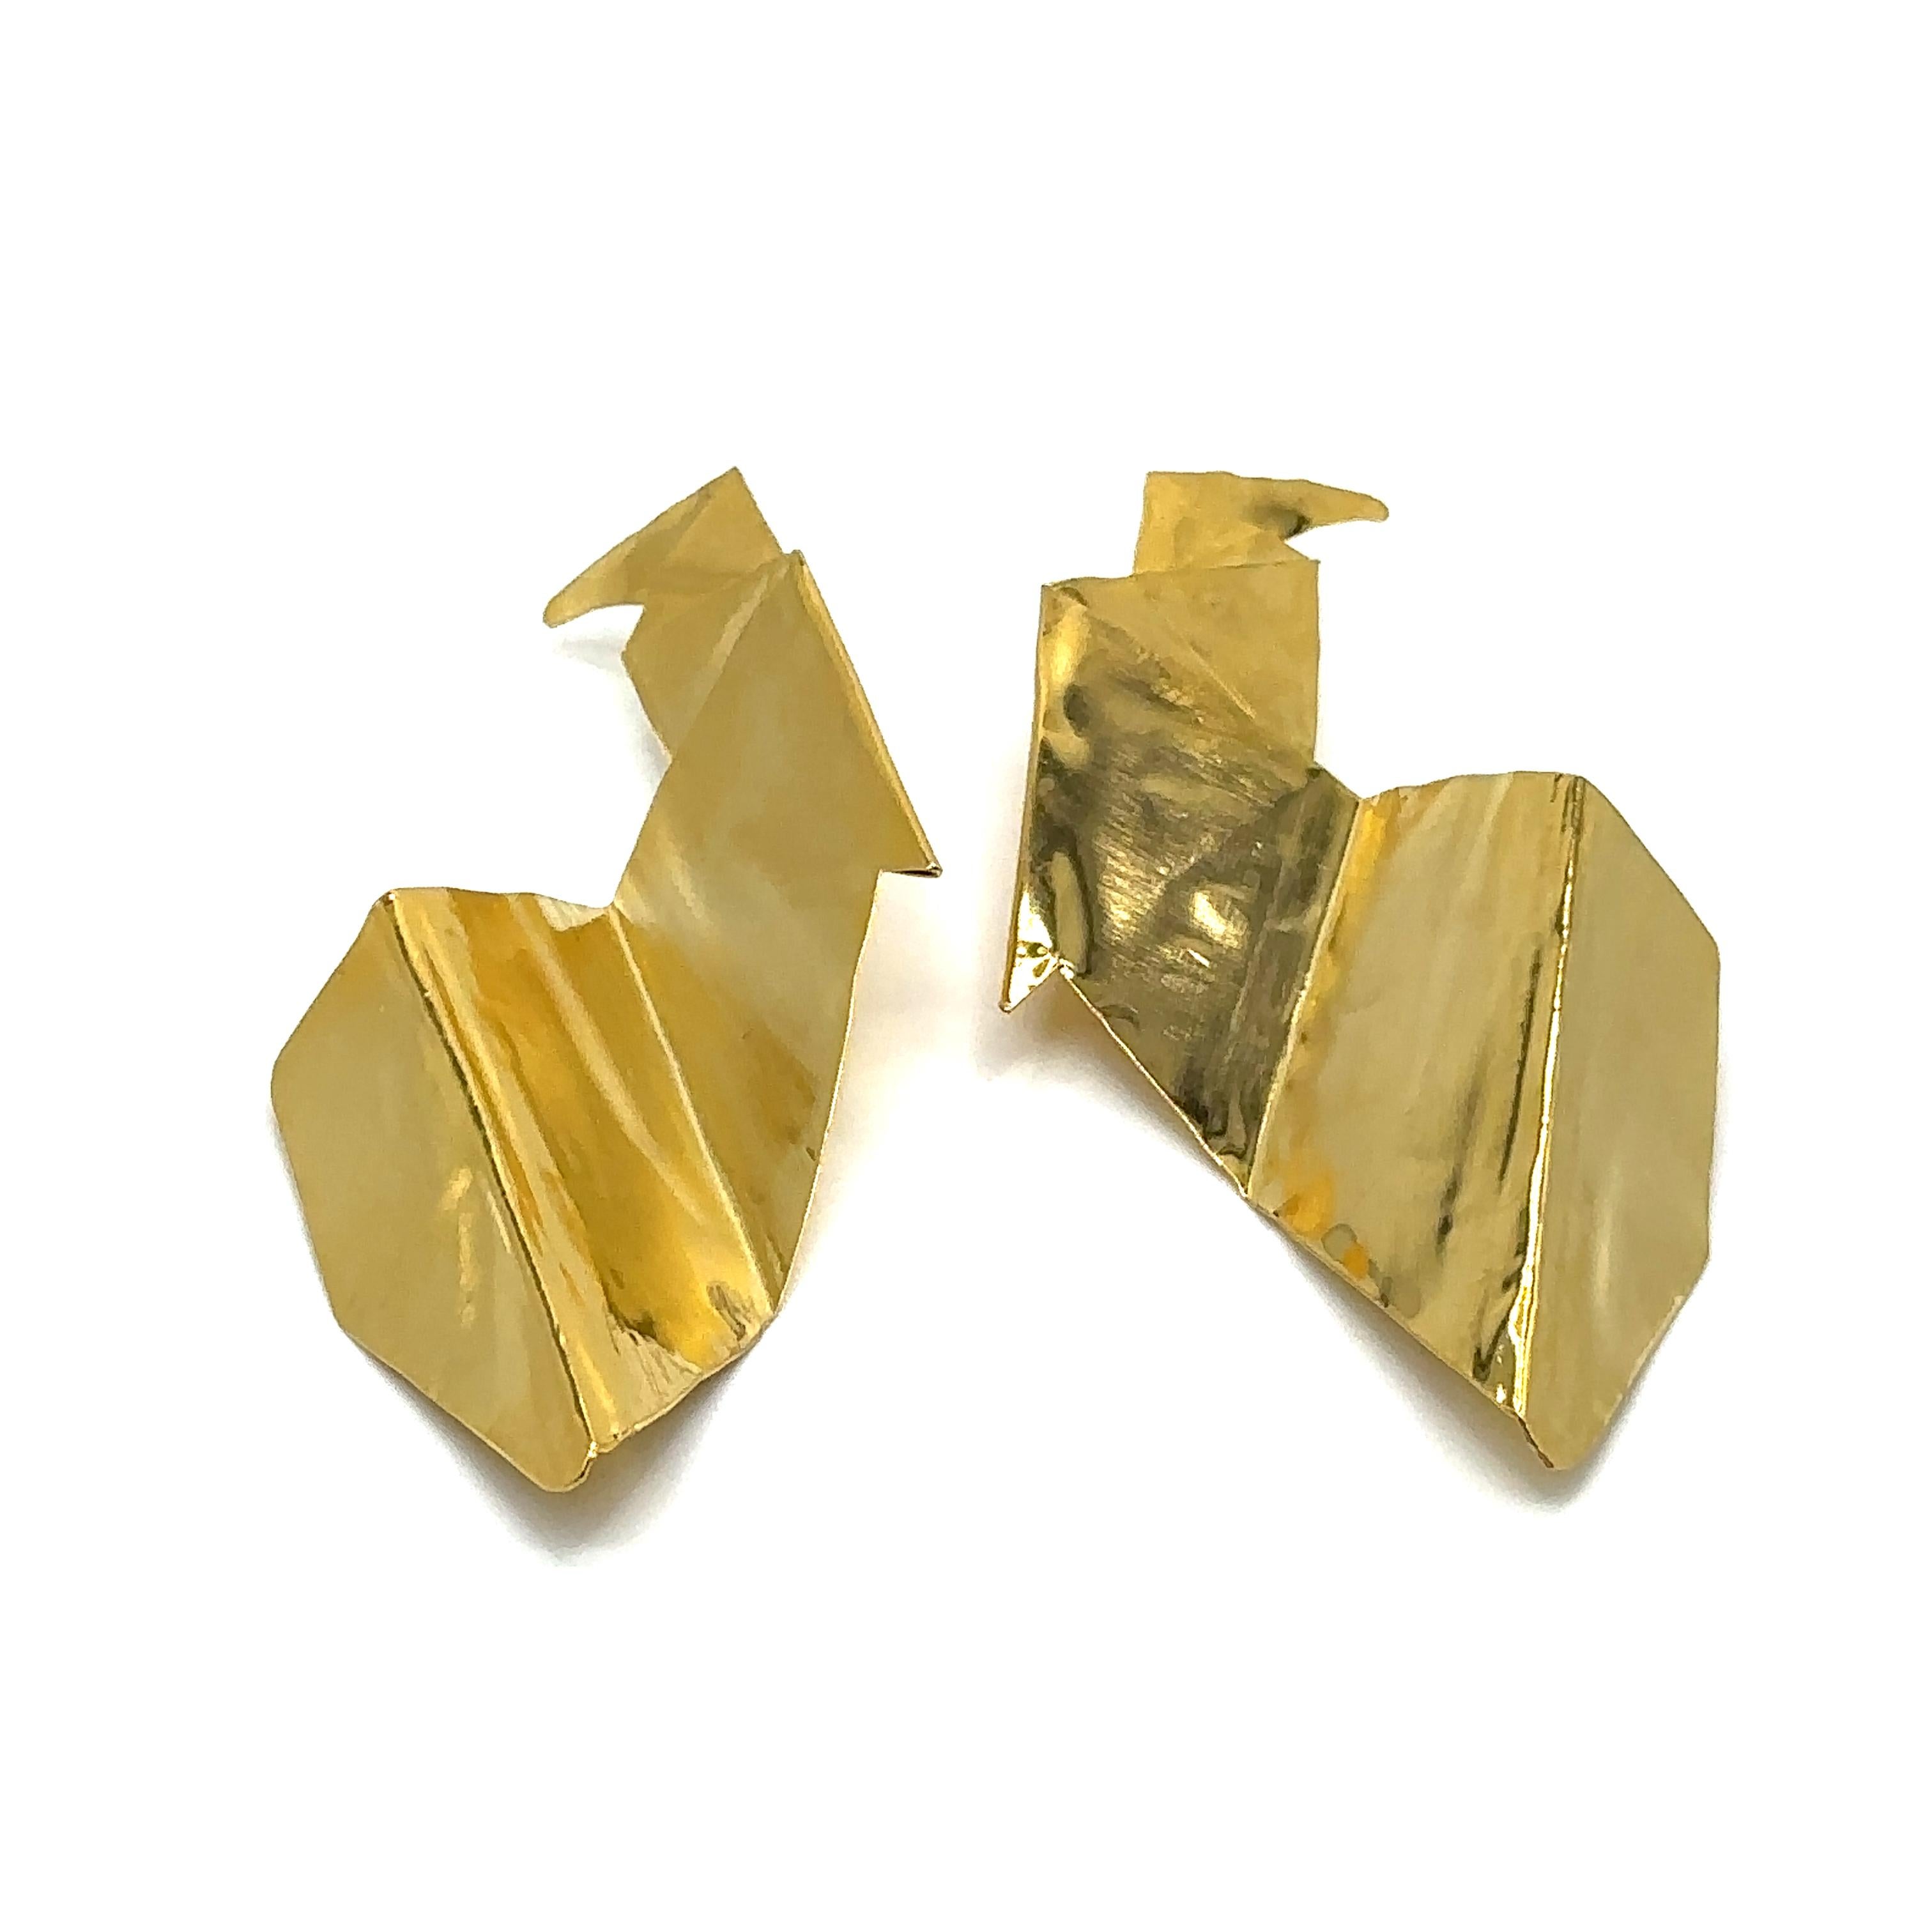 The piece was inspired by Japanese origami. Folding techniques were used.  Erika was created to bring style with that statement impact with the lightness and versatility that a piece of jewelry should have. It is a timeless pieces. 

Made out a